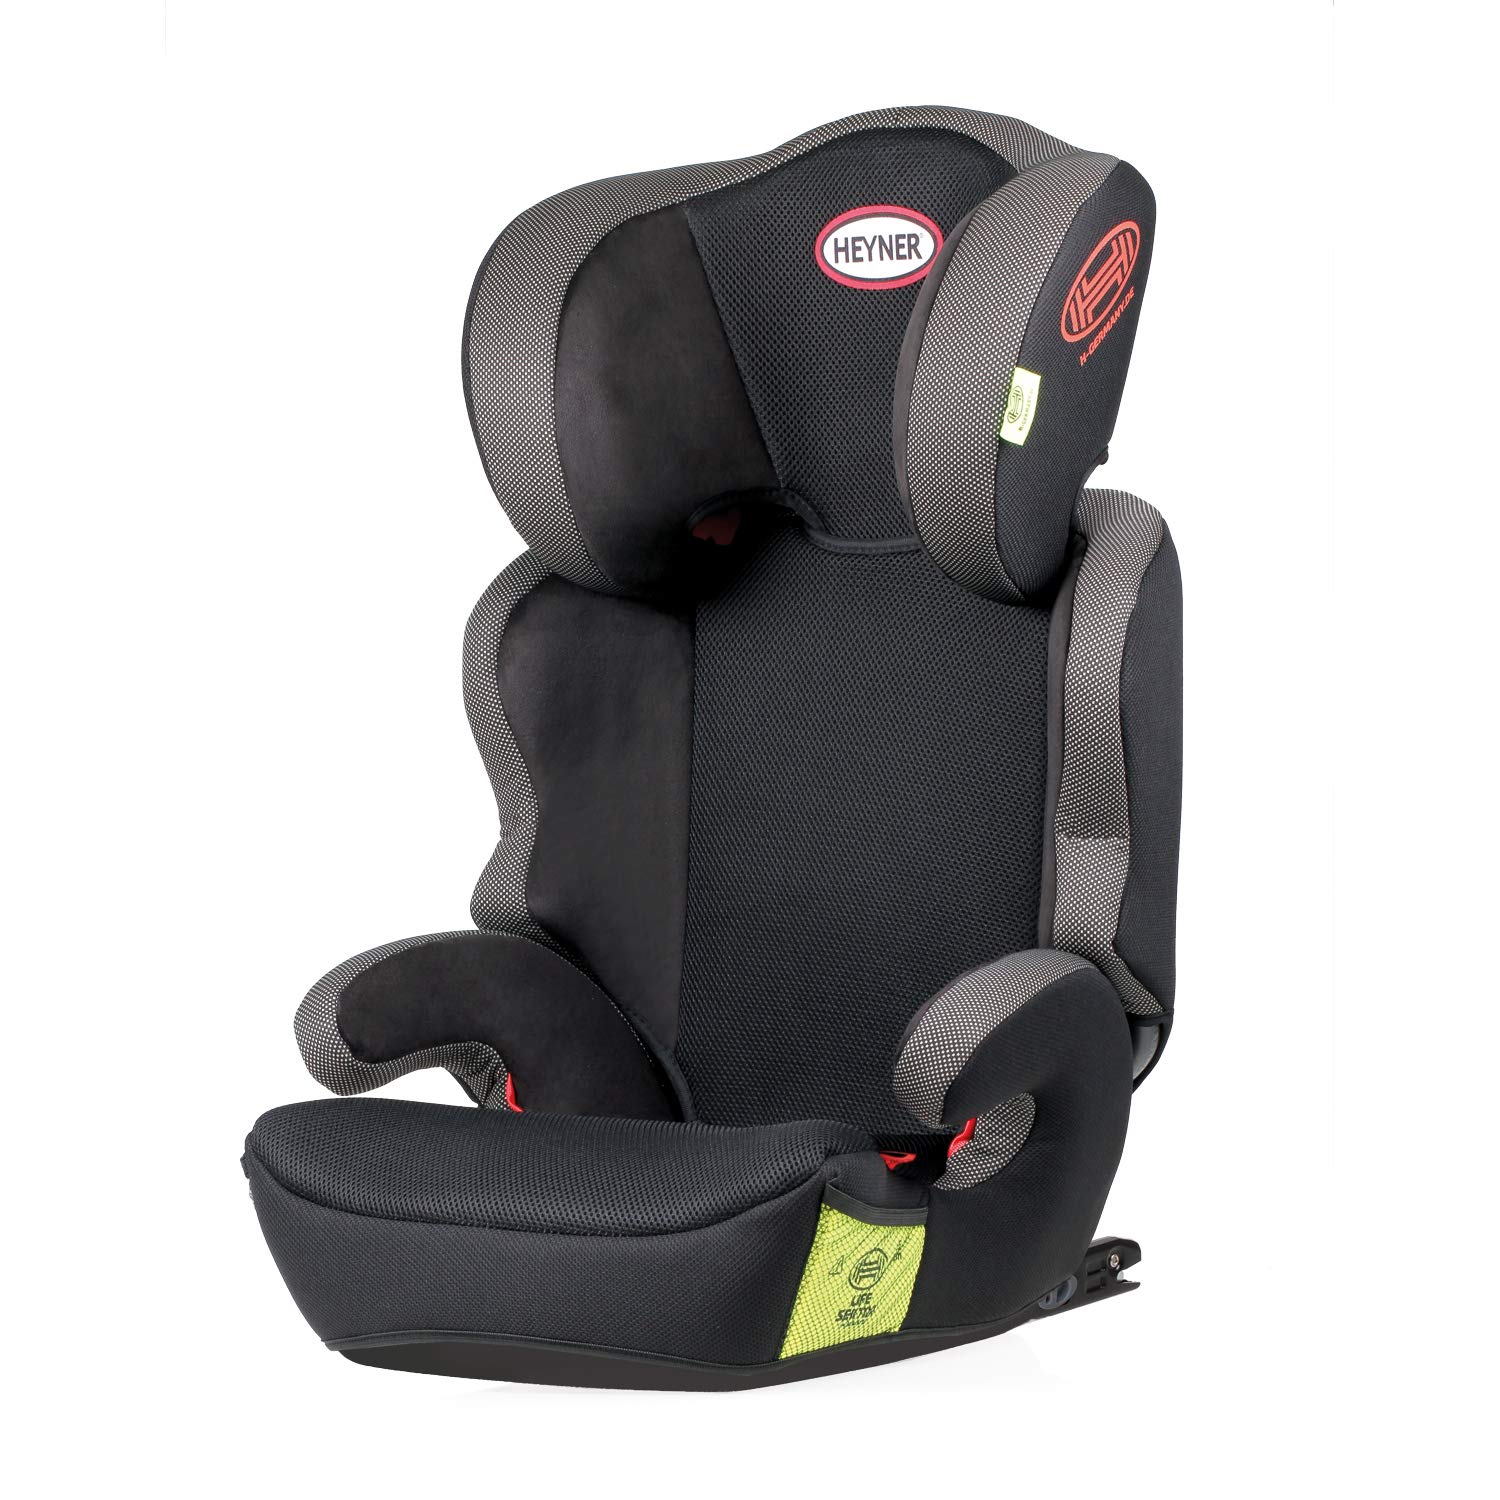 HEYNER® Kids Car Booster Seat, Extra Large Booster Seat, ISOFIX 15 to 36 kg, Group 2.3, 95 to 150 cm, Colour: Black